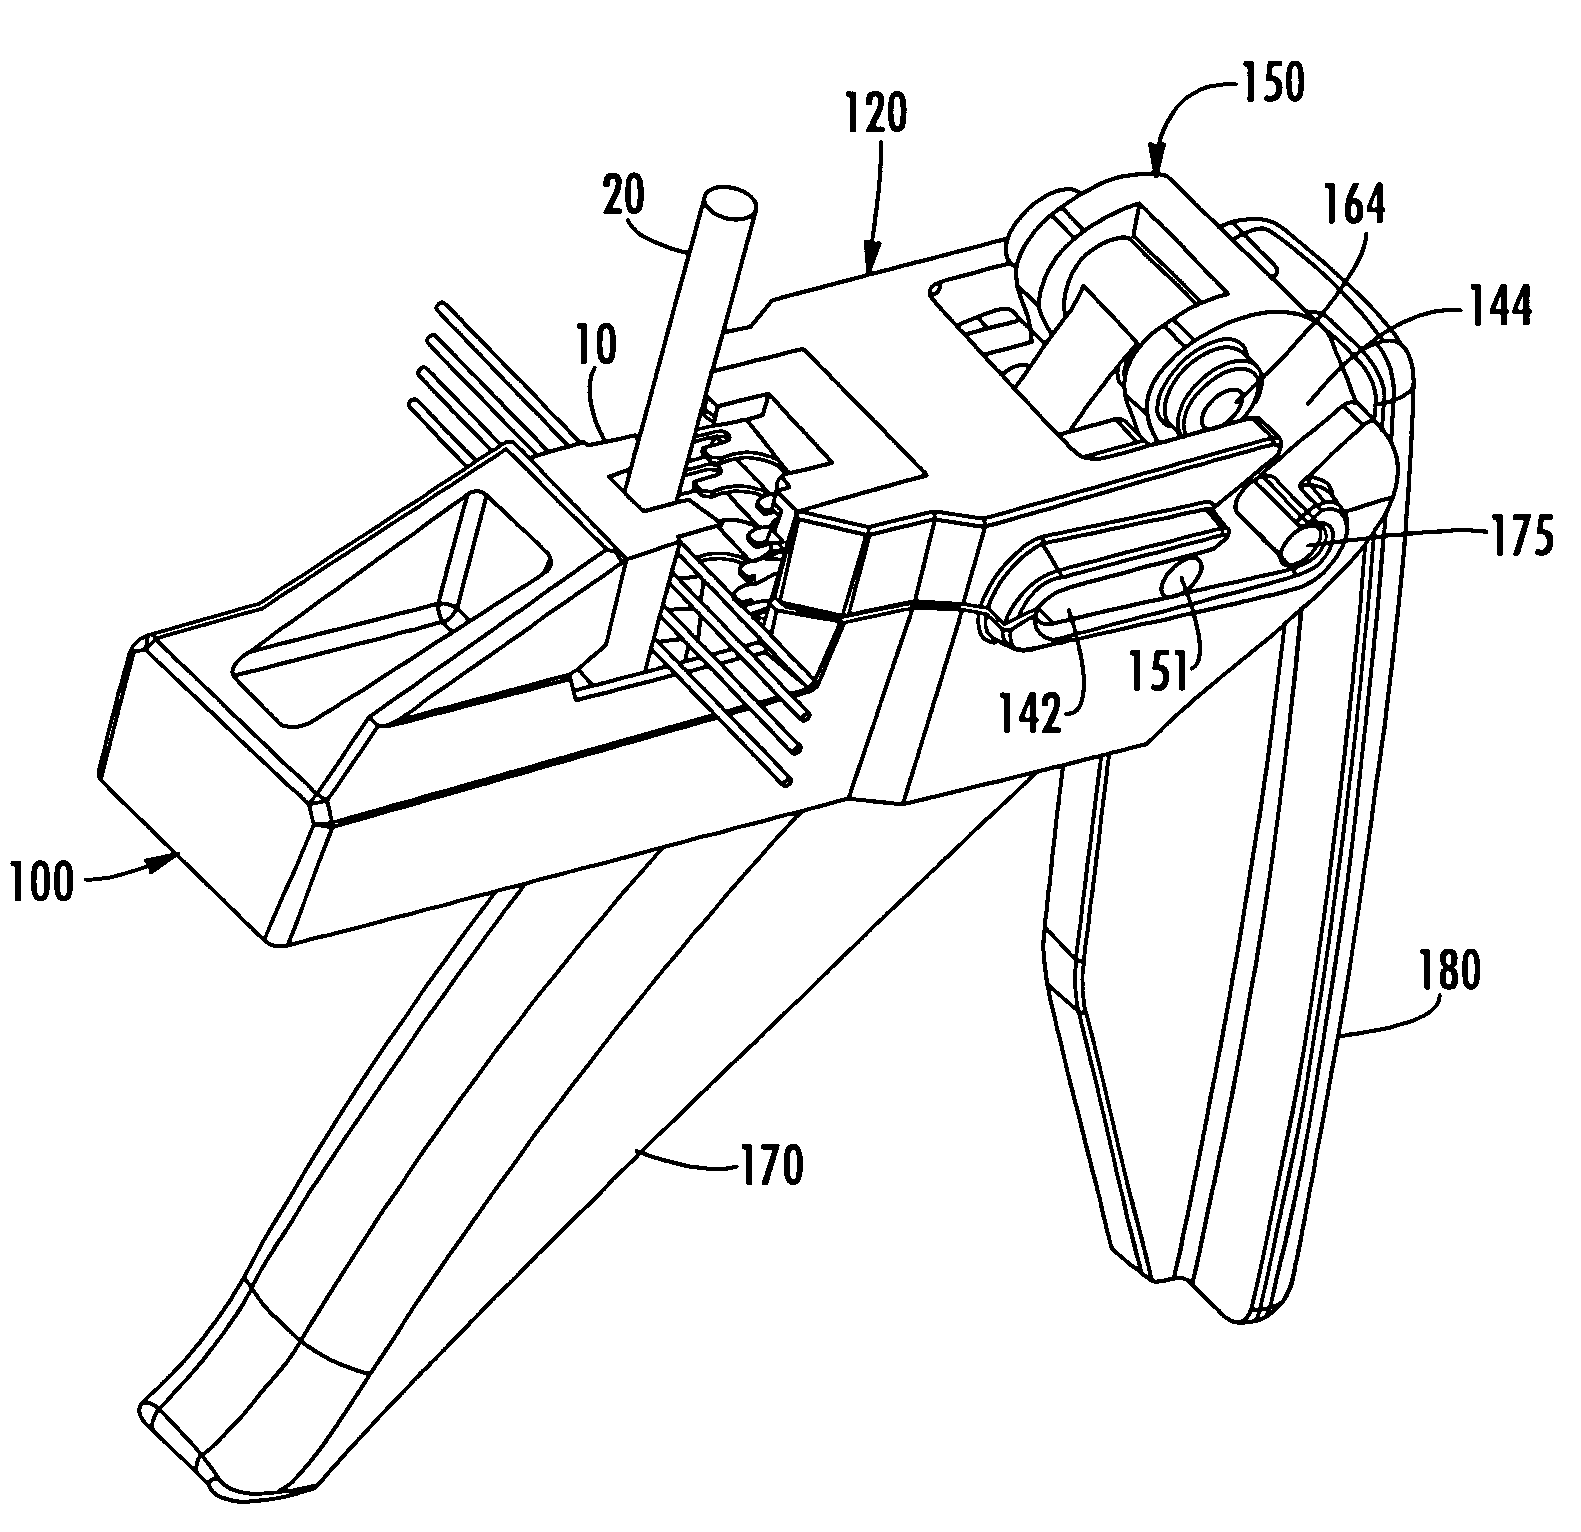 Multiple-wire termination tool with translatable jack and cutting blade precision alignment carrier